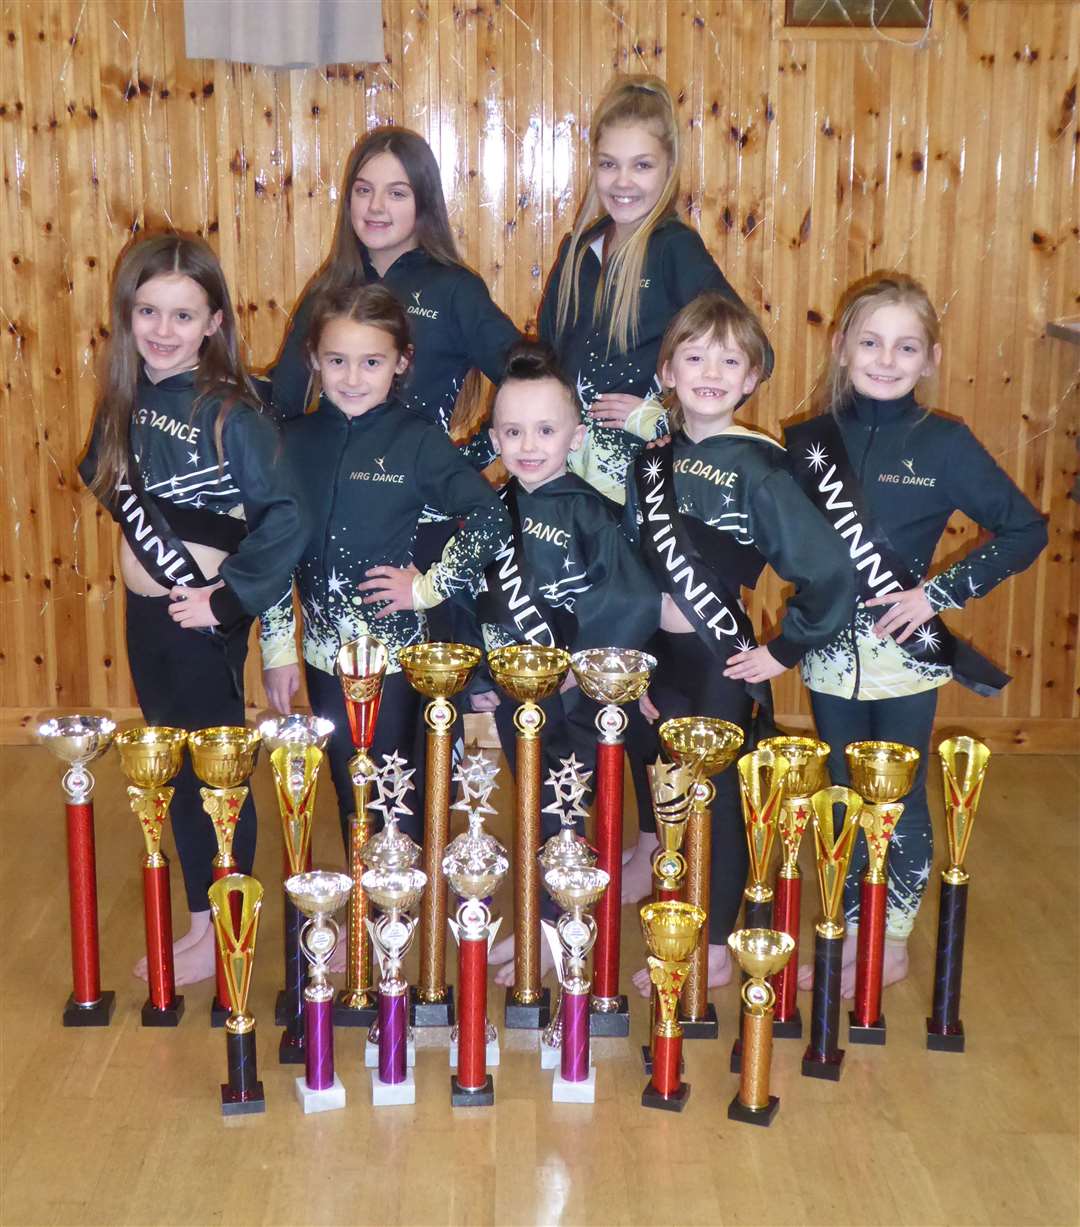 Members of NRG Dance's competitive team with their trophies.